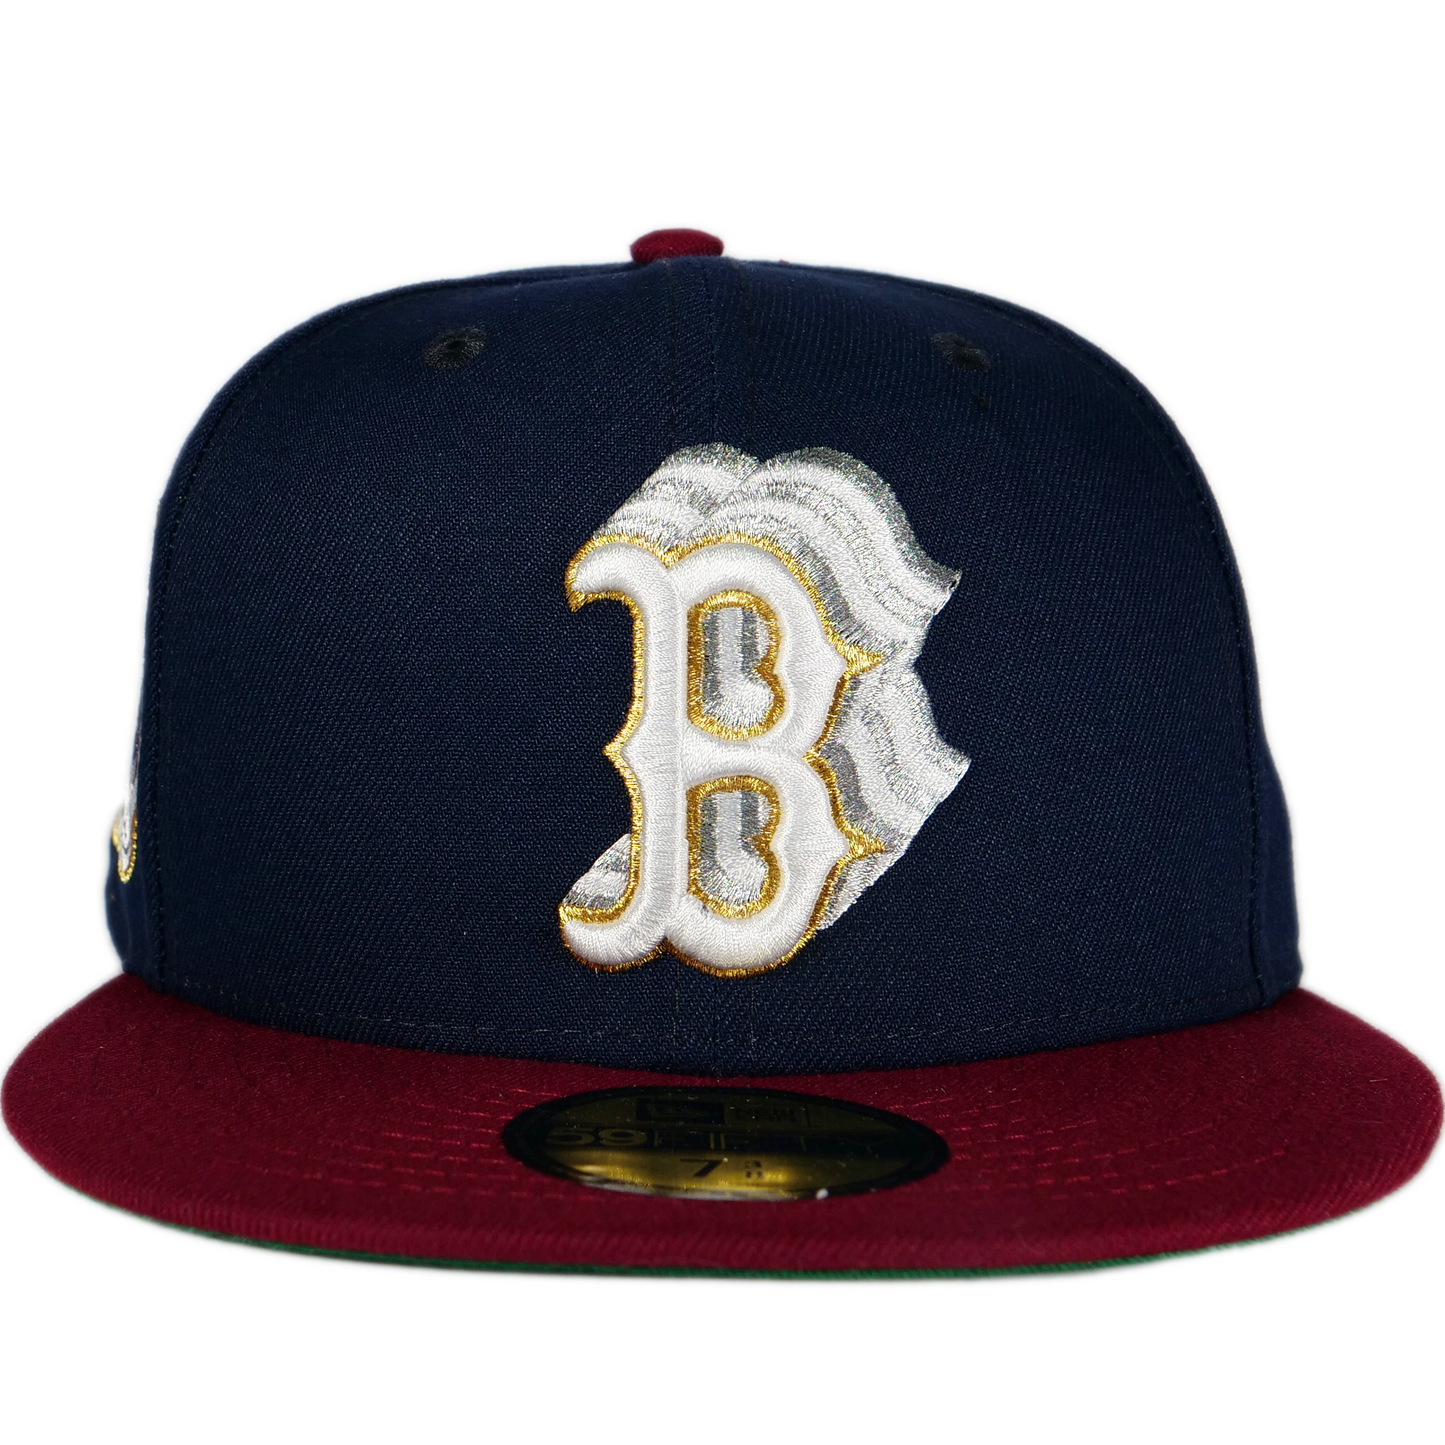 New Era Boston Red Sox 59FIFTY Fitted Hat - Navy/ Red